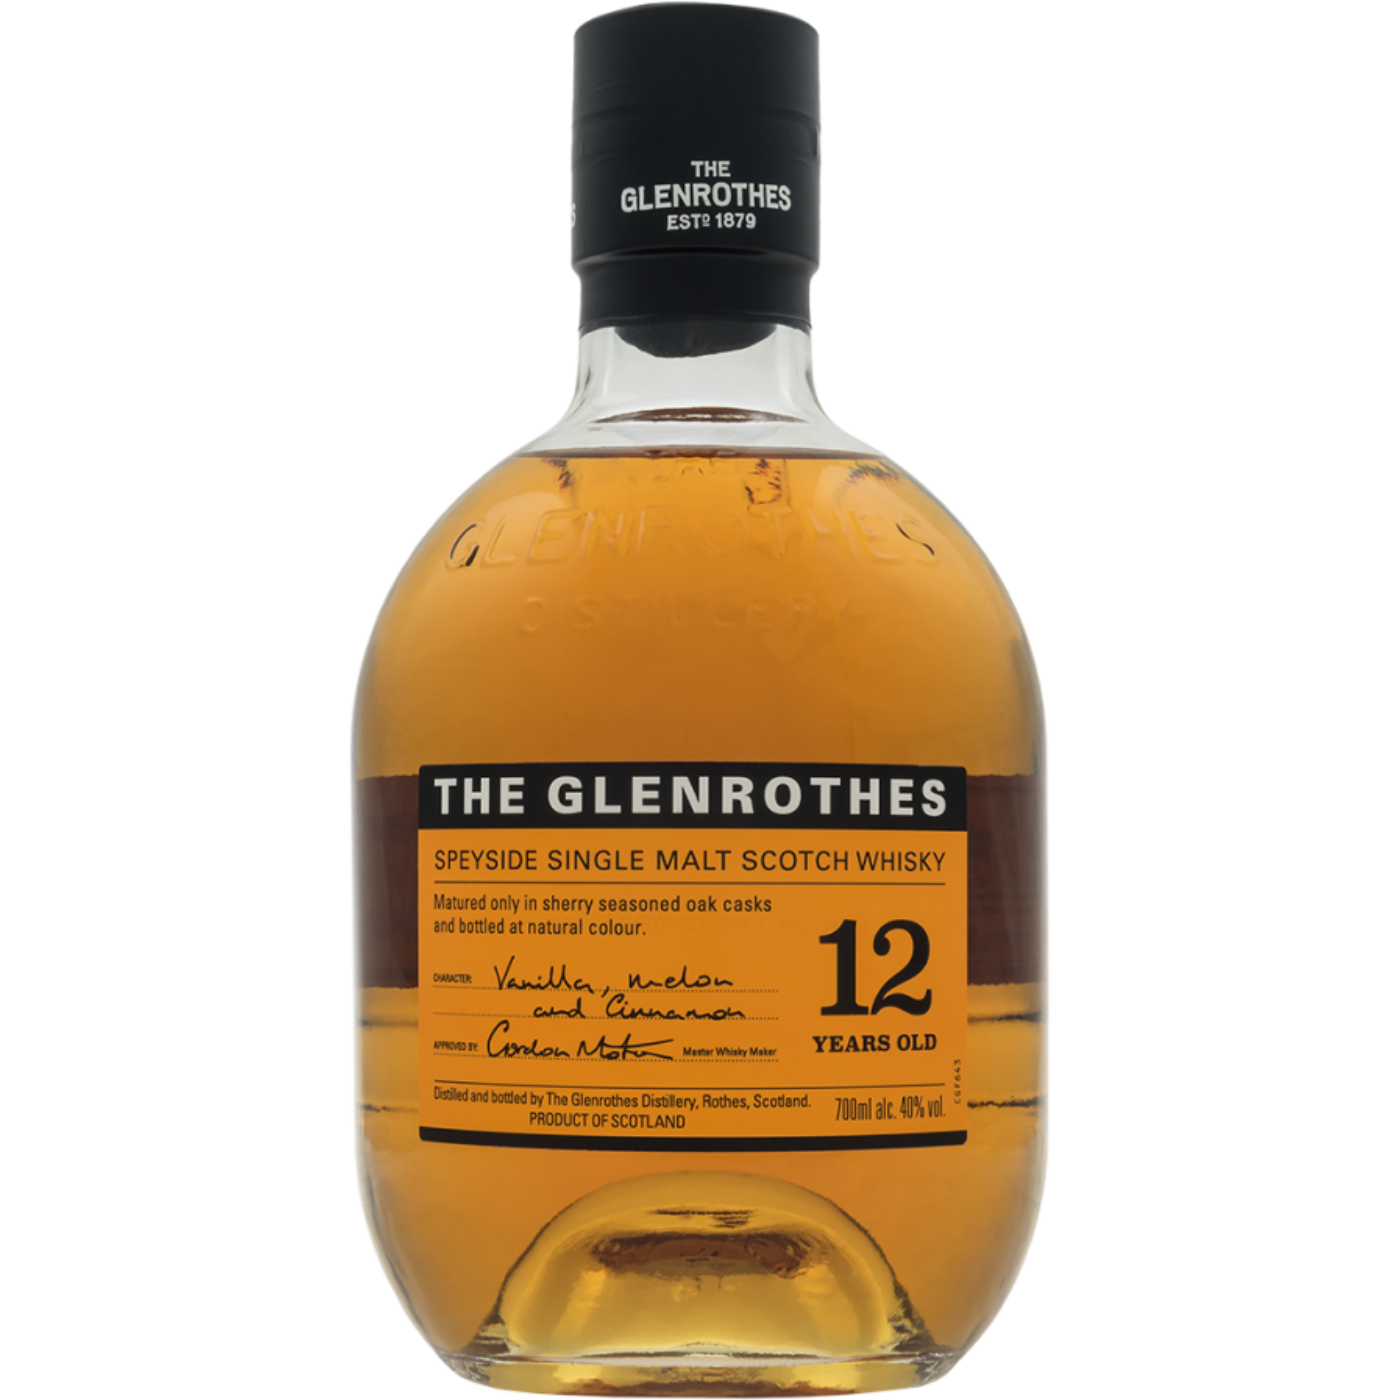 GLENROTHES 12 YEAR OLD